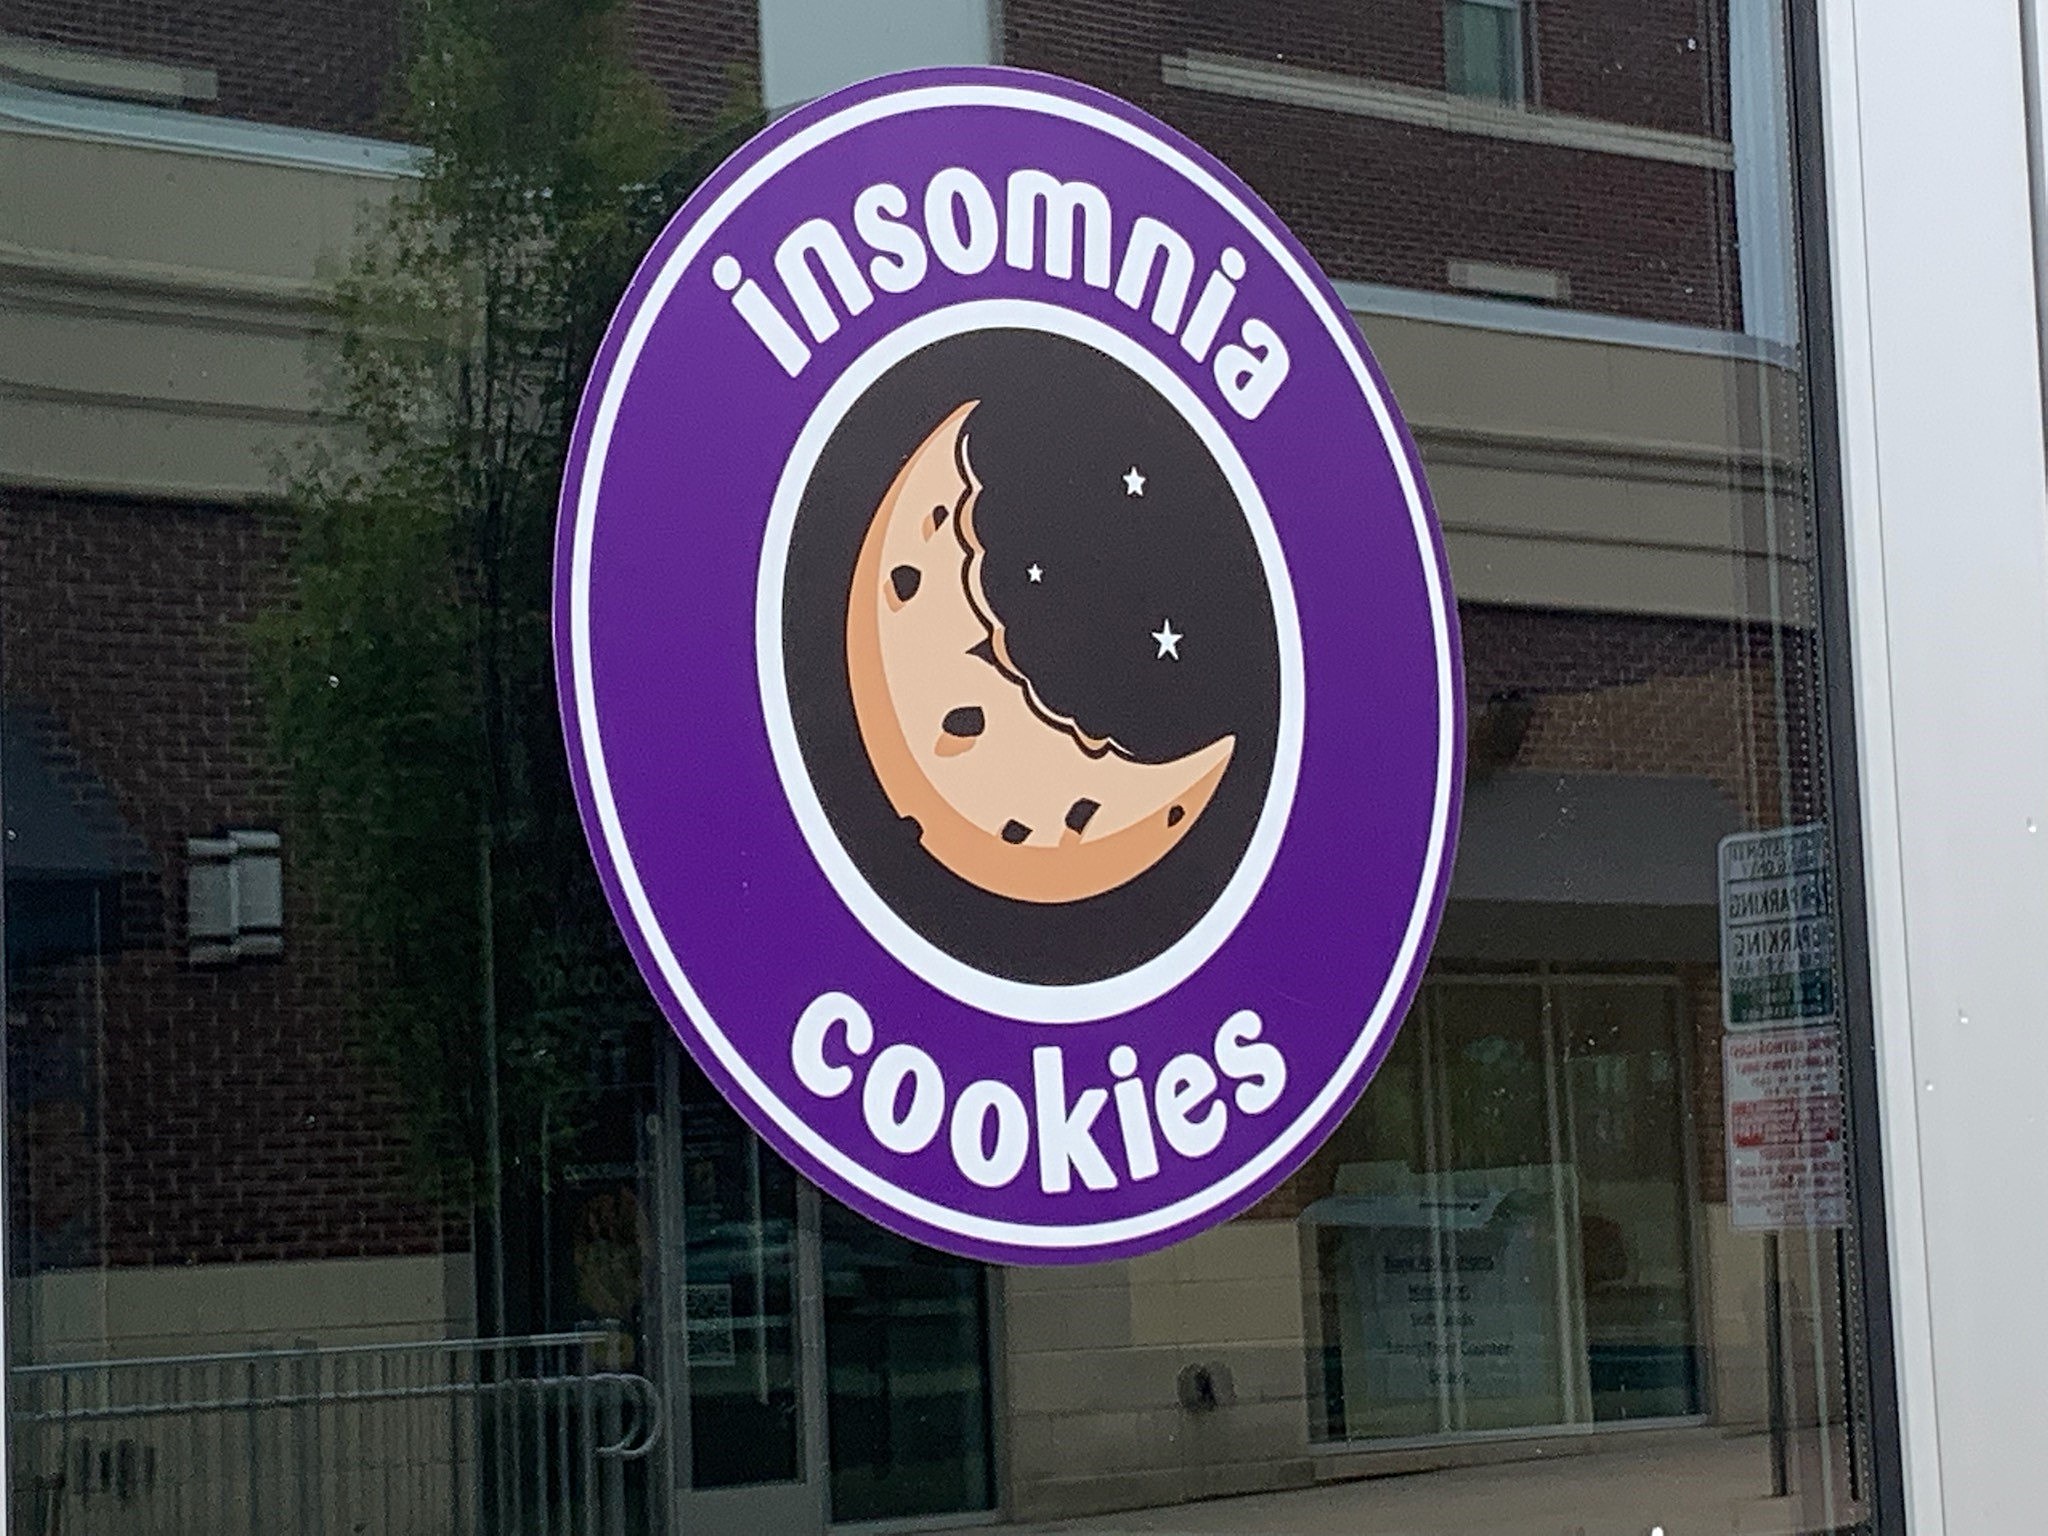 insomnia cookies delivery nyu